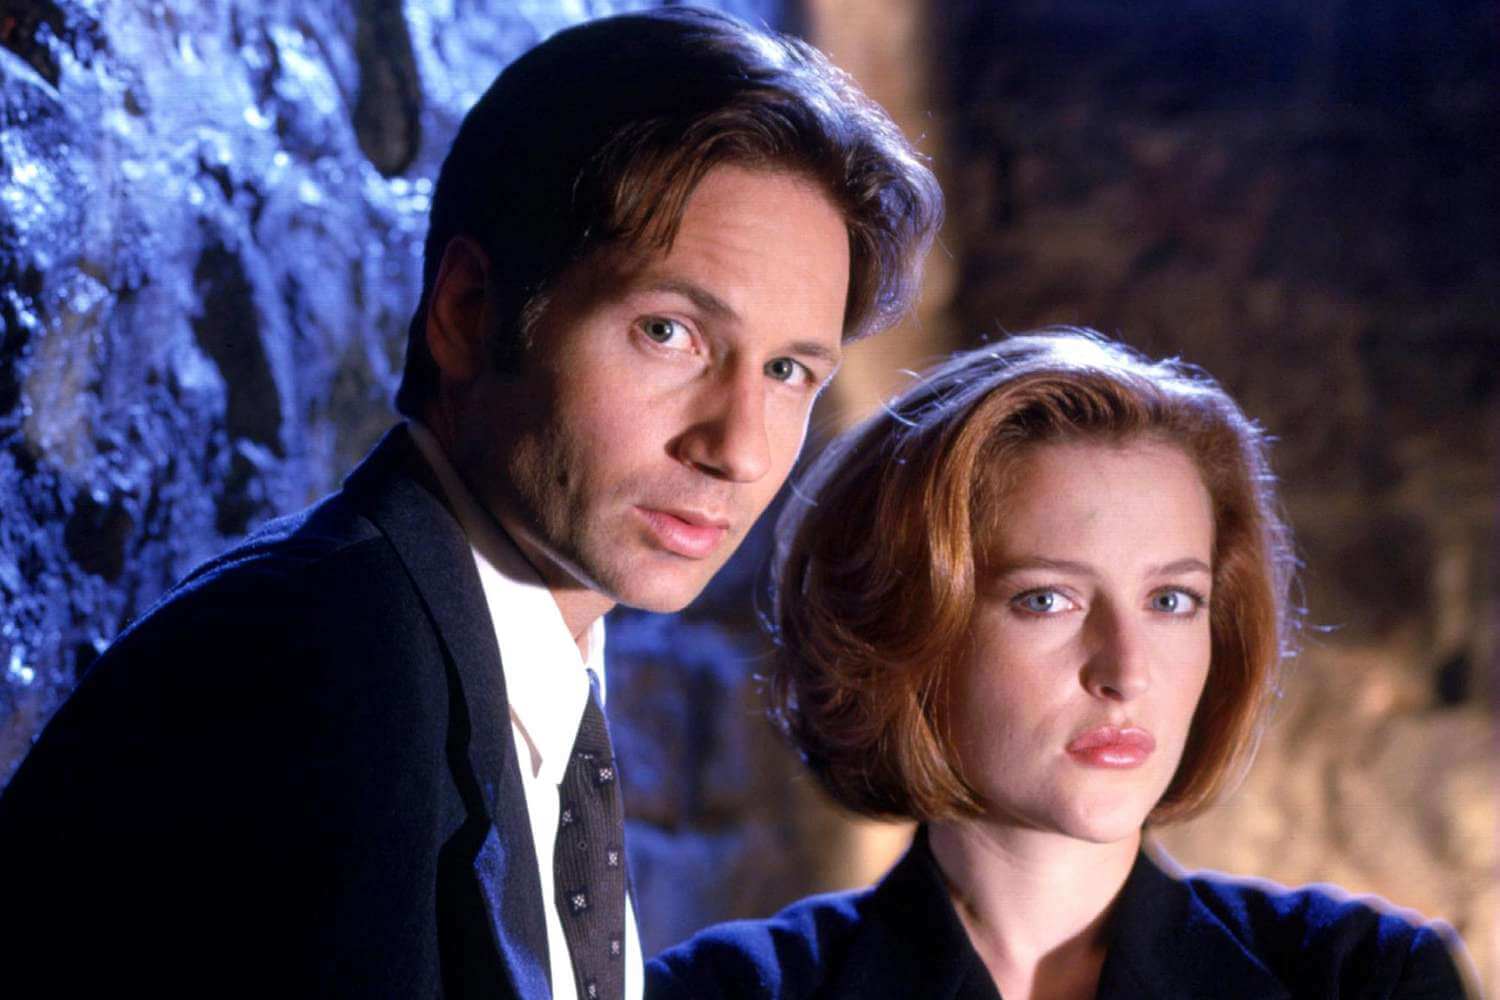 Gillian Anderson and David Duchovny's final scene in The X-Files proved too much for viewers